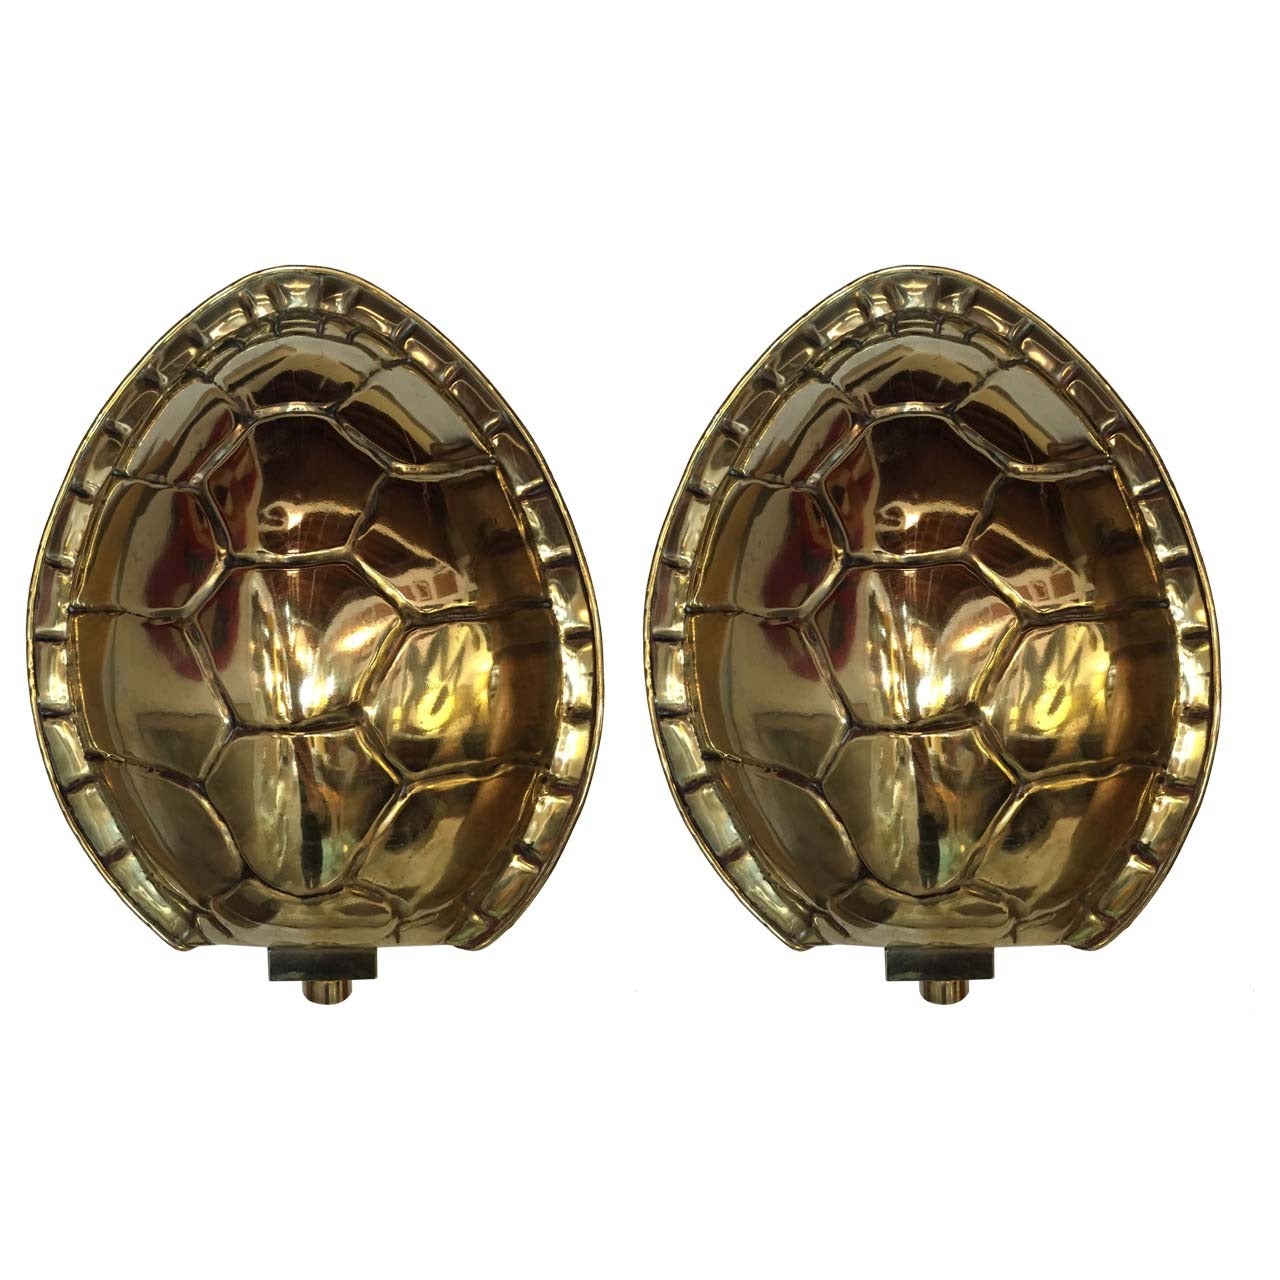 Rare Pair of Polished Brass Tortoiseshell Sconces Attributed to Arthur Court